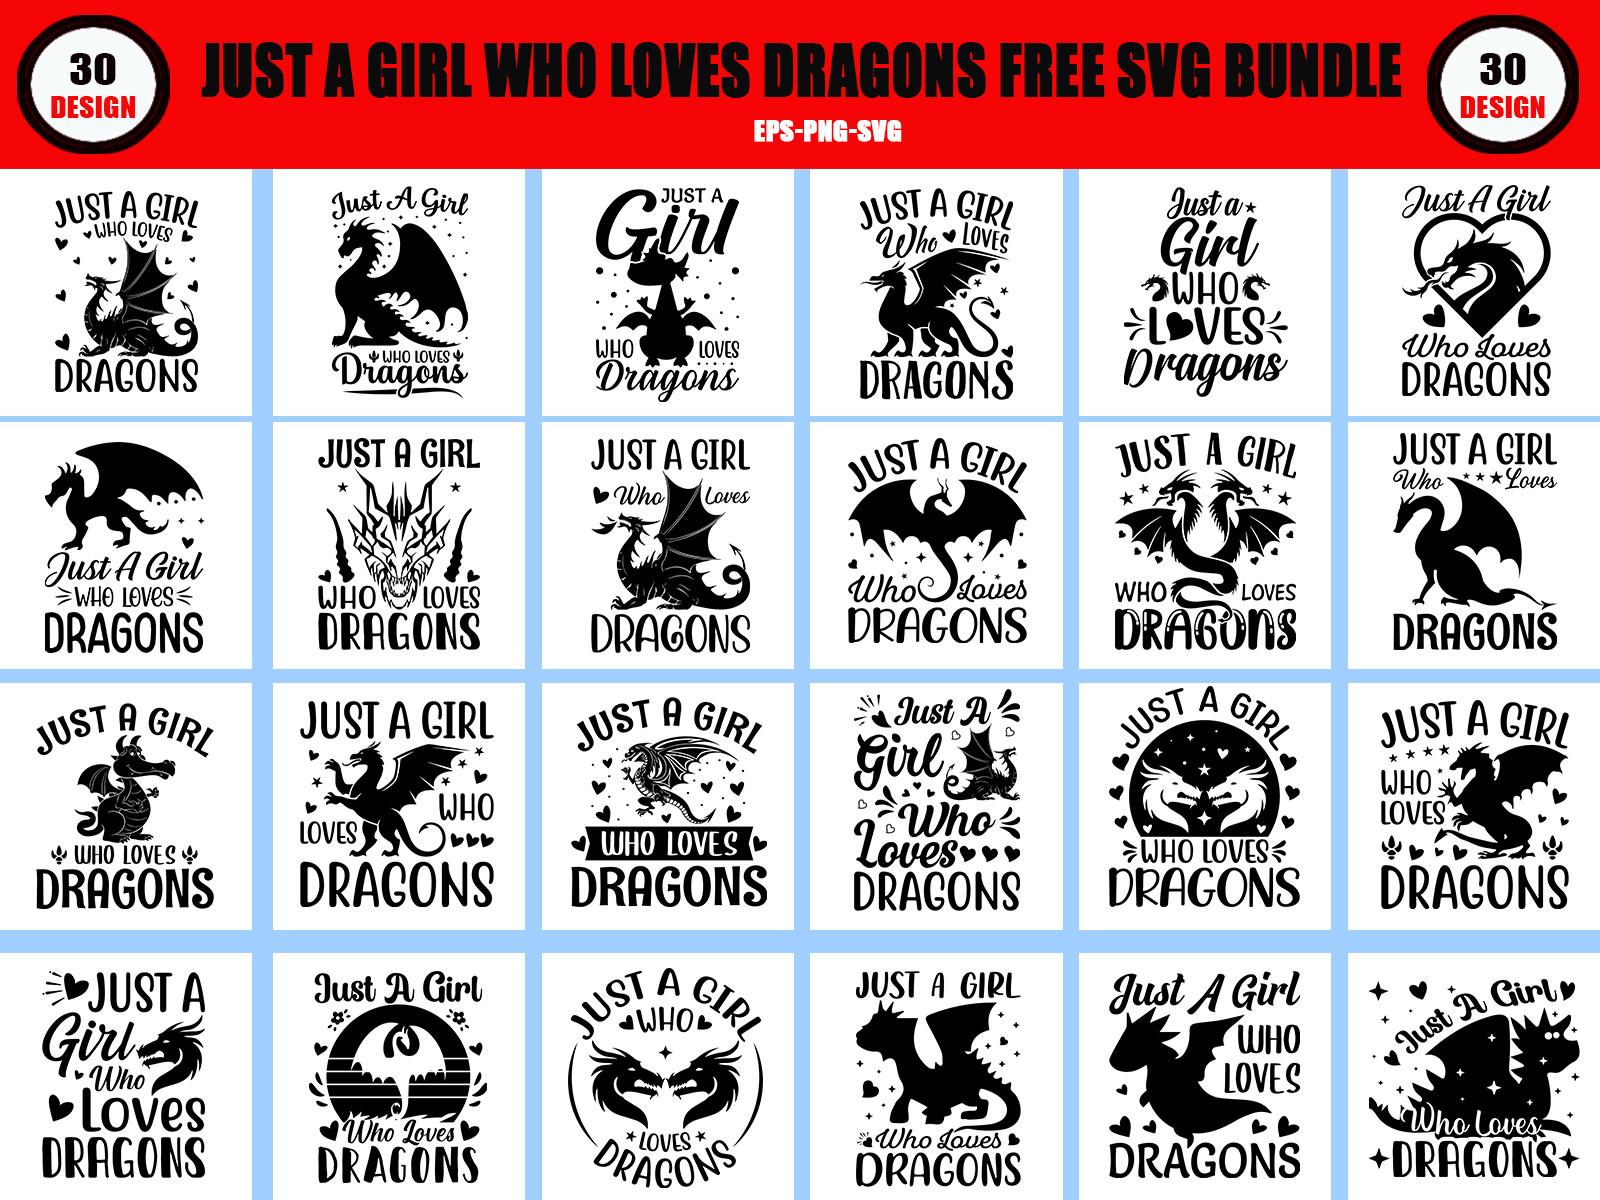 JUST a GIRL WHO LOVES DRAGONS Free